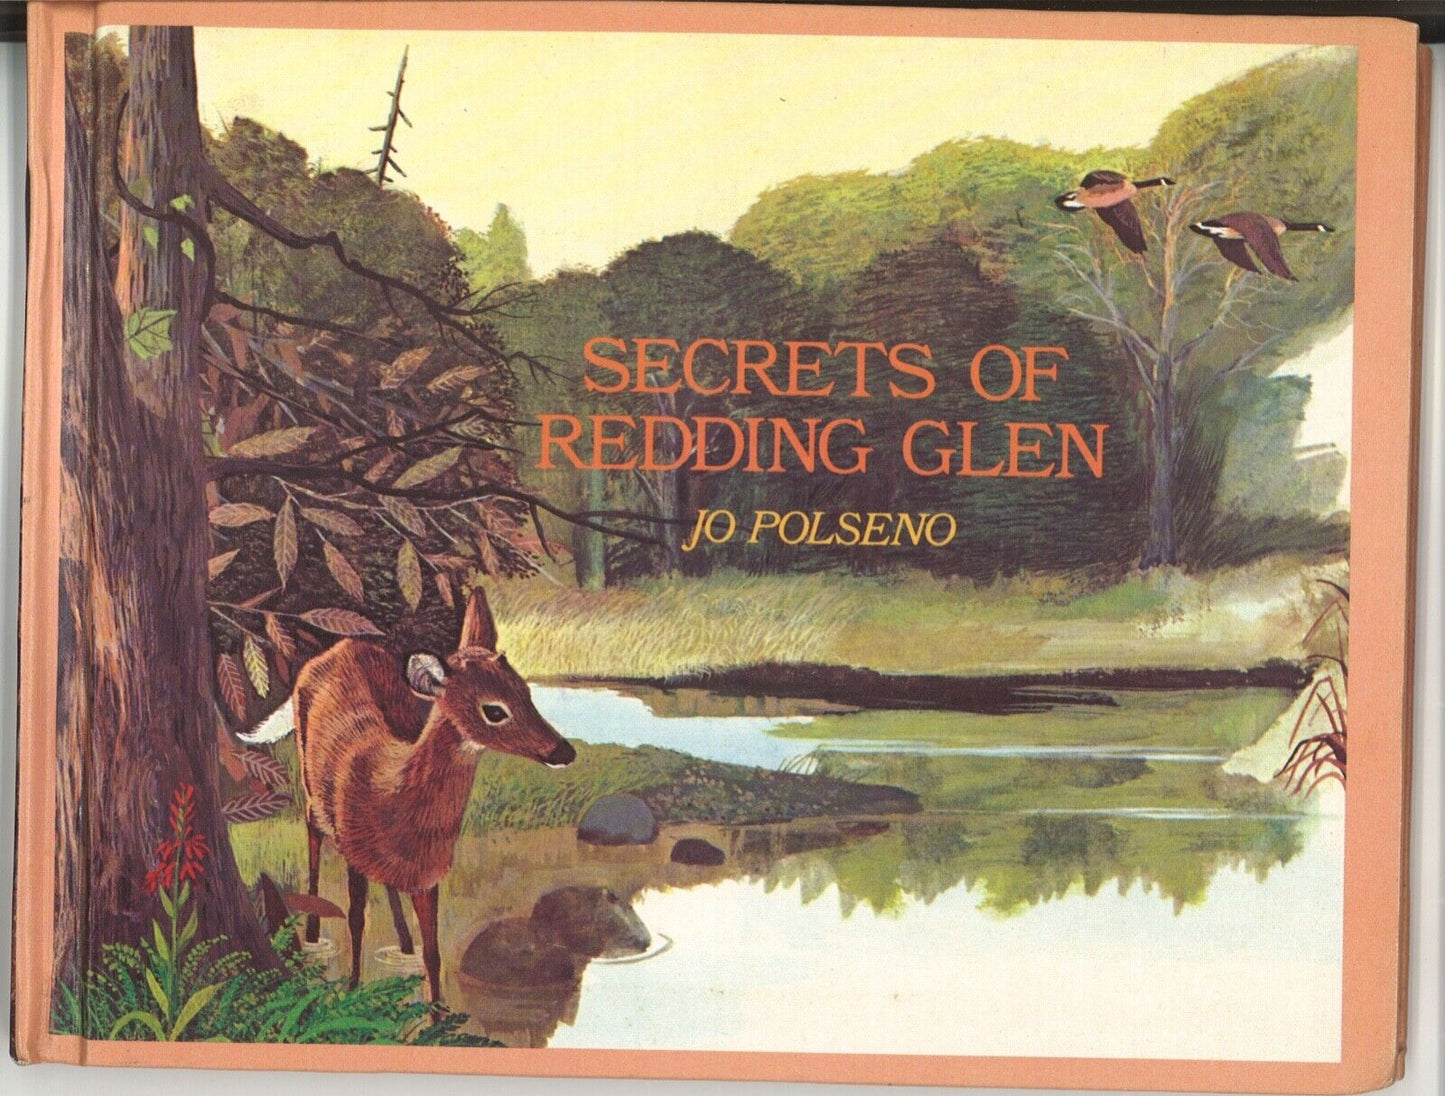 Secrets of Redding Glen The Natural History of a Wooded Valley